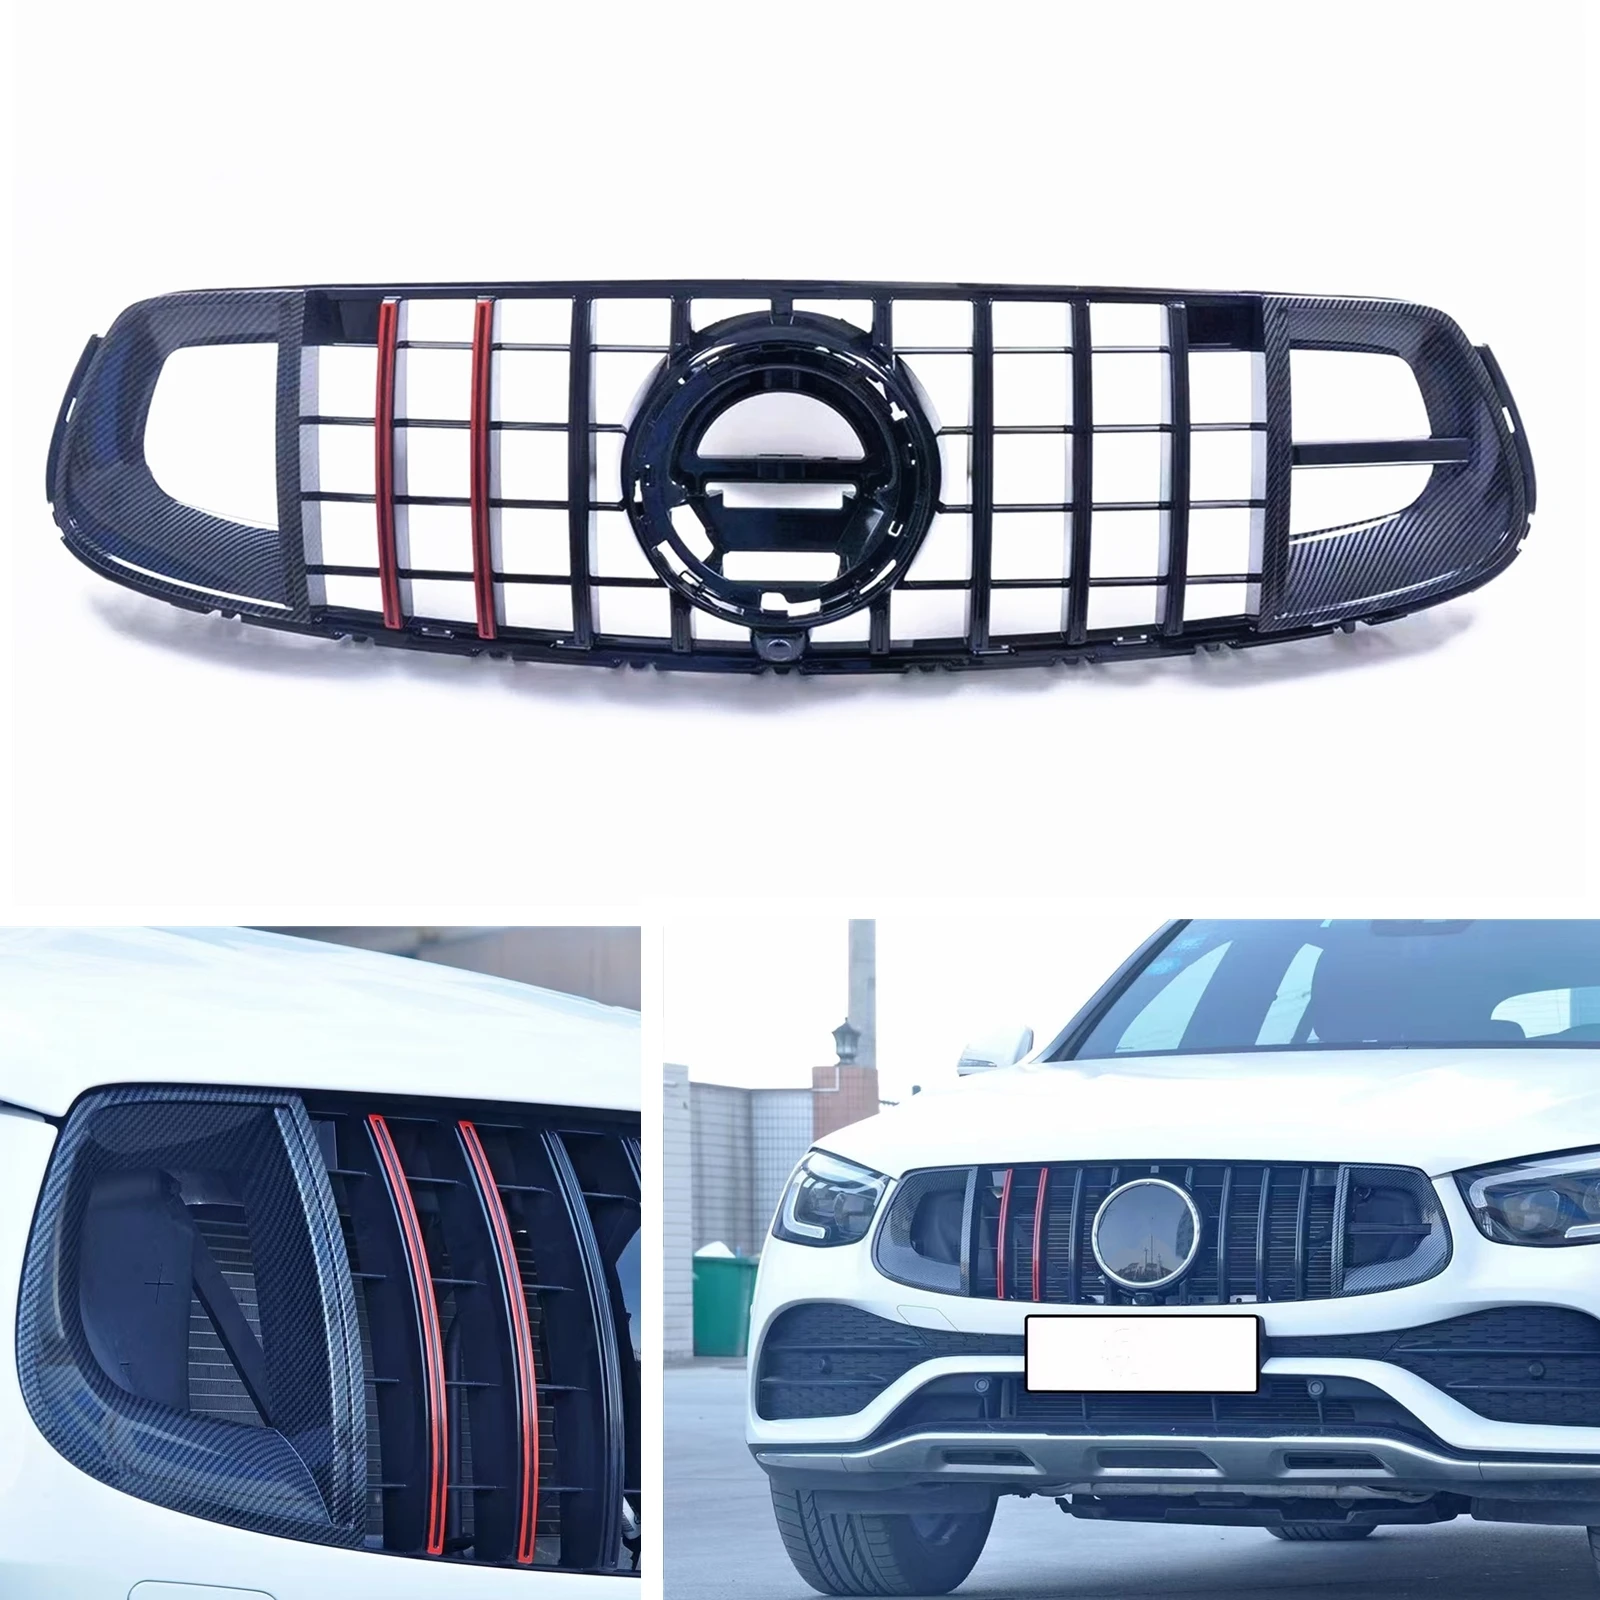 

Front Grille Grill For Mercedes Benz W253 X253 GLC Coupe GLC300 2020-2022 GLC63 AMG Car Upper Bumper Hood Mesh Grid Black+Red